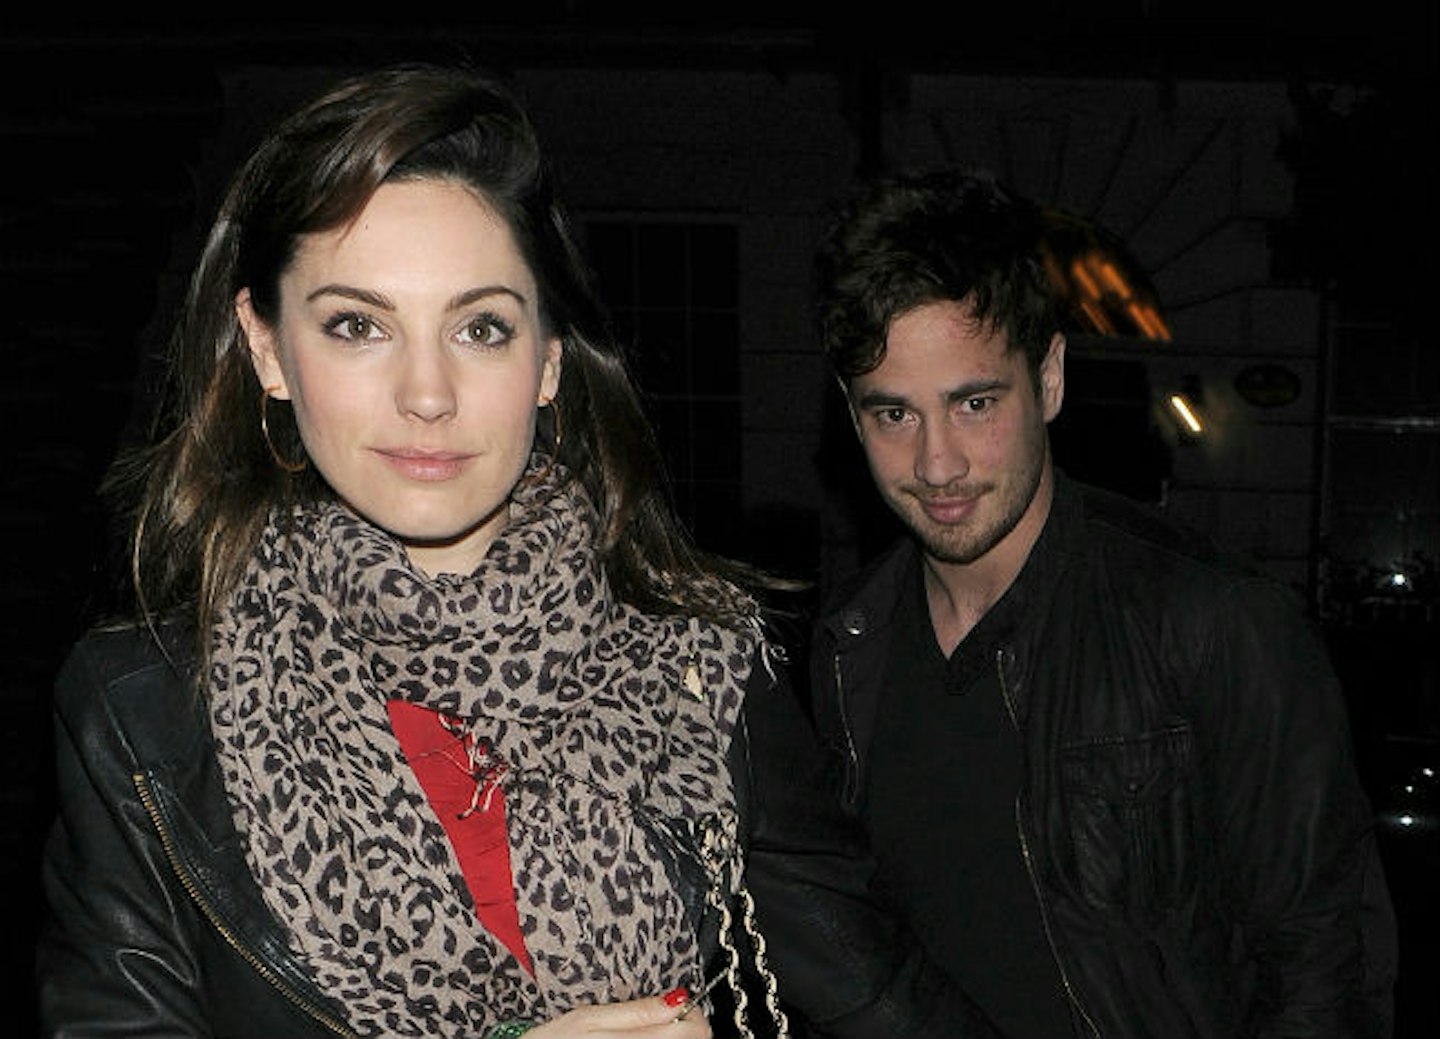 Kelly and ex-boyfriend Danny Cipriani on a night out in 2013